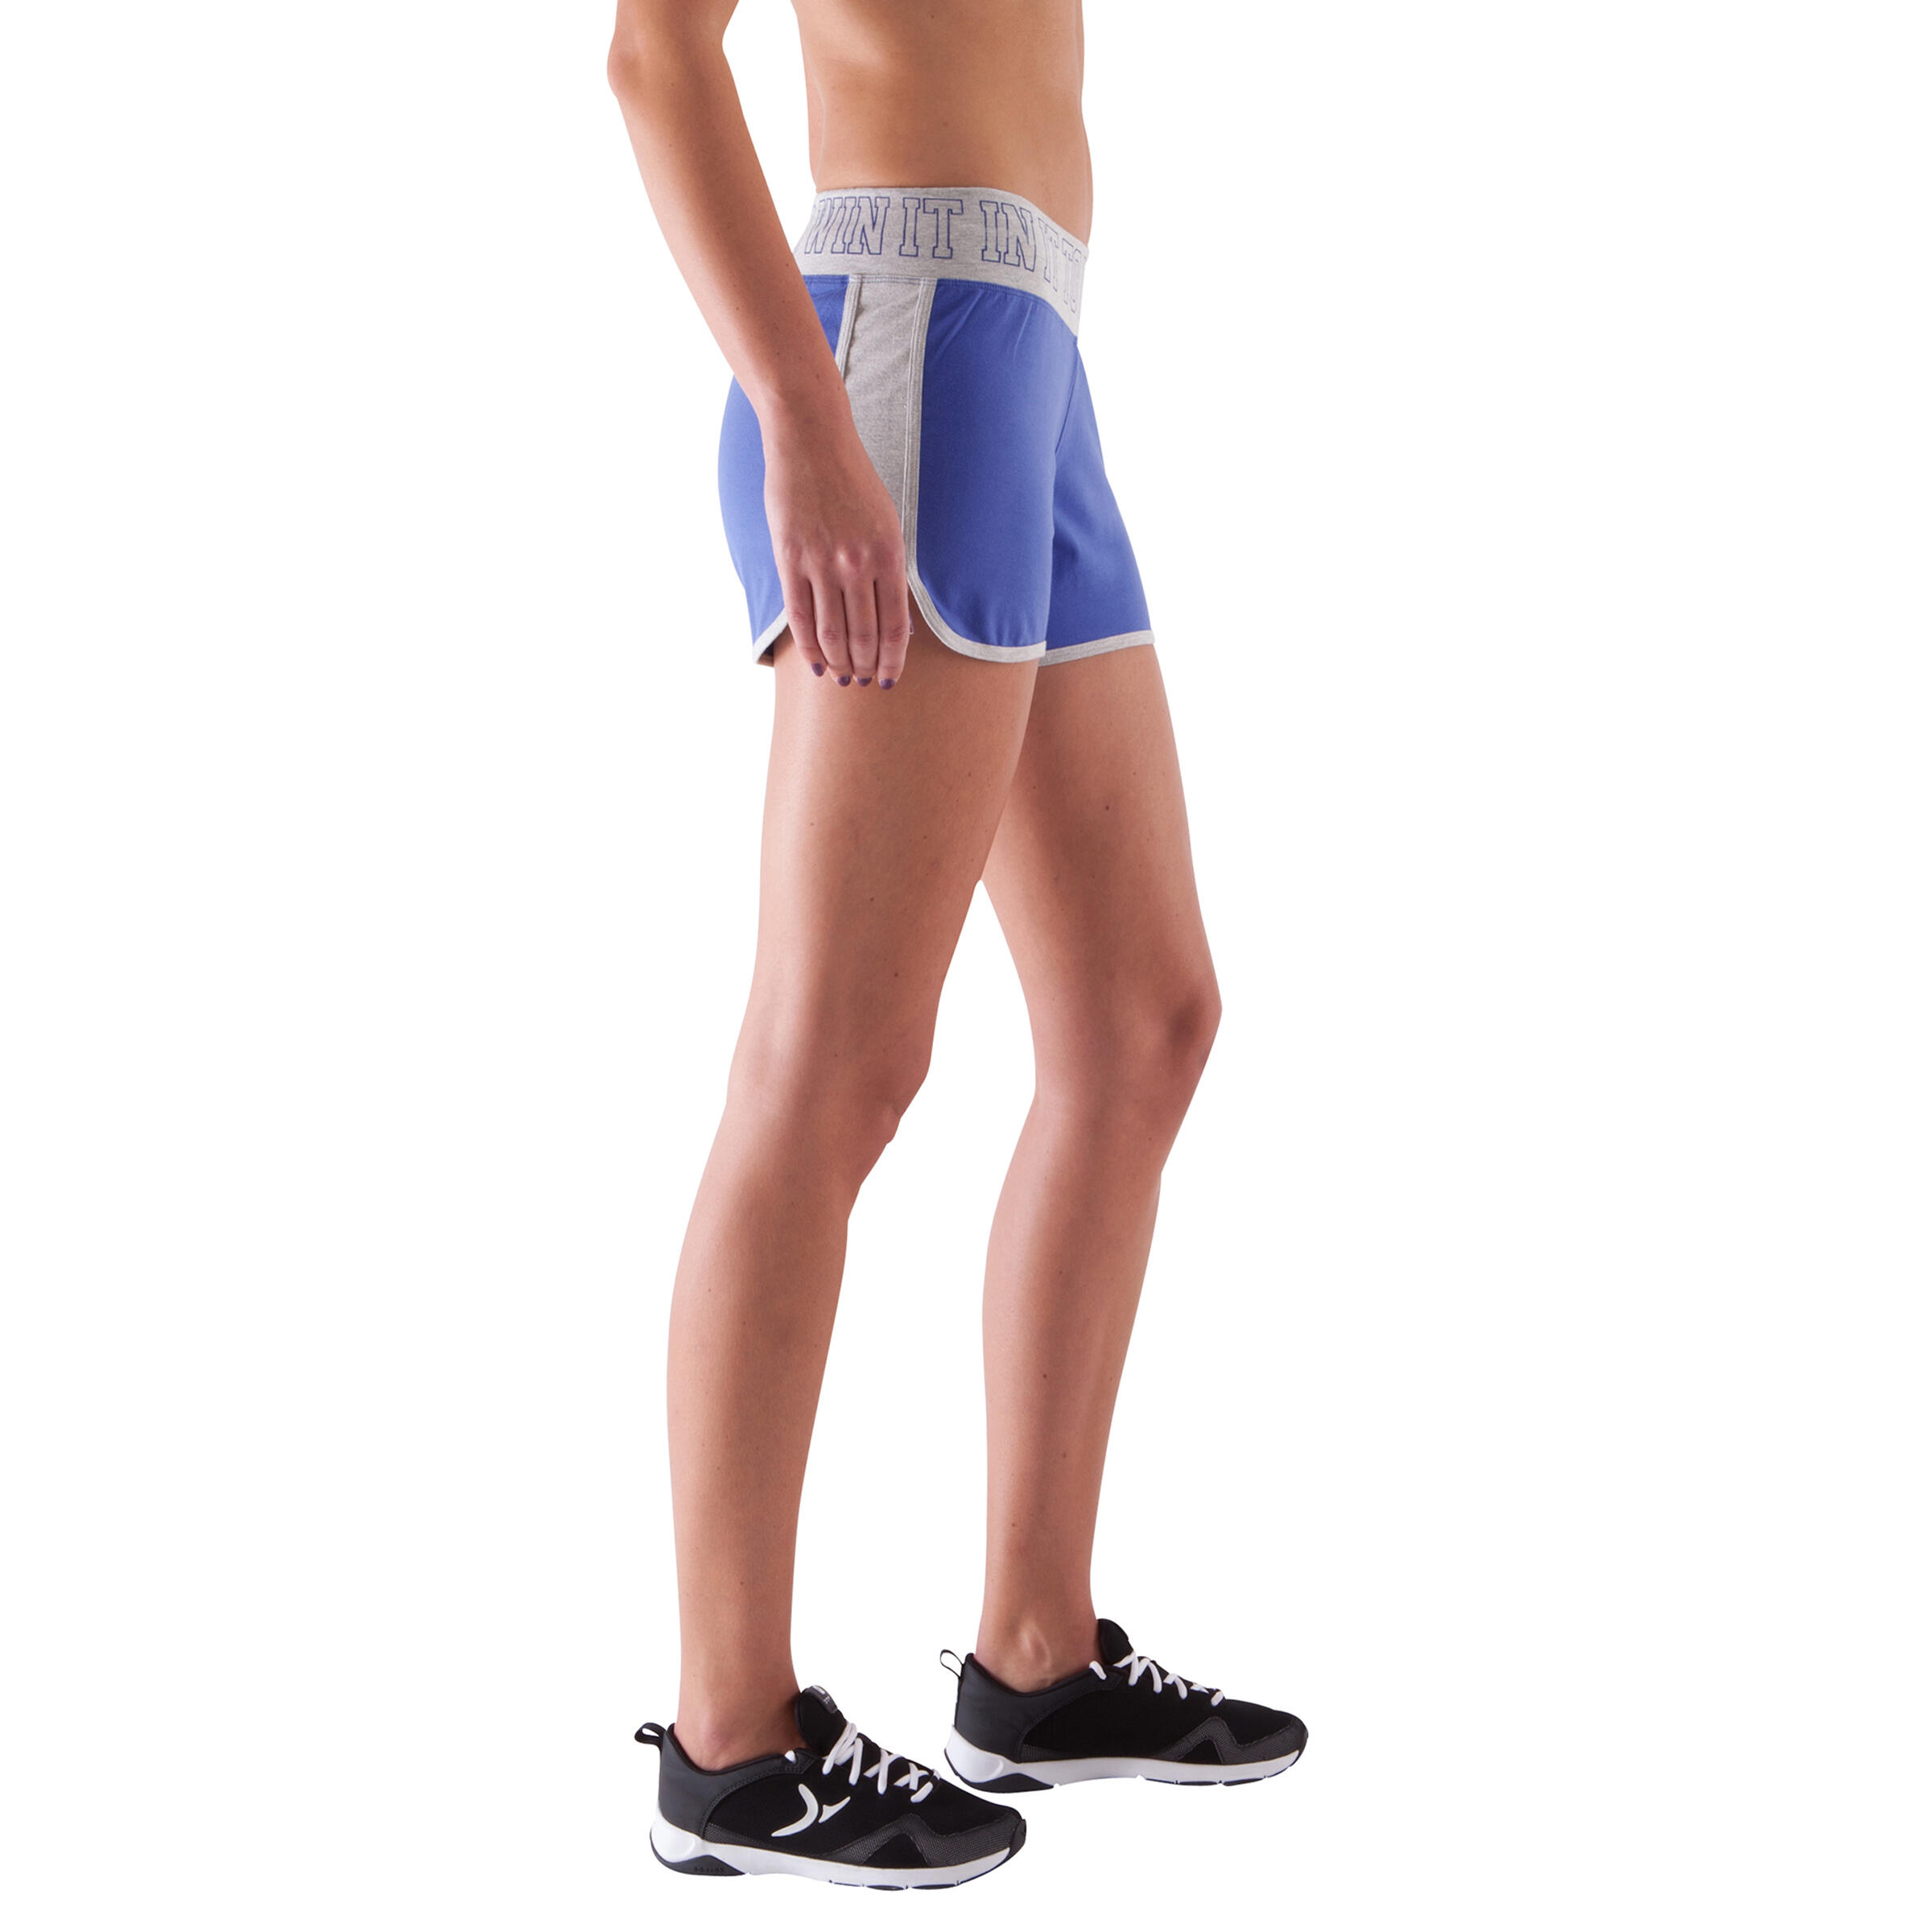 Women's Fitness Shorts with Contrasting Waistband - Blue/Grey 4/10